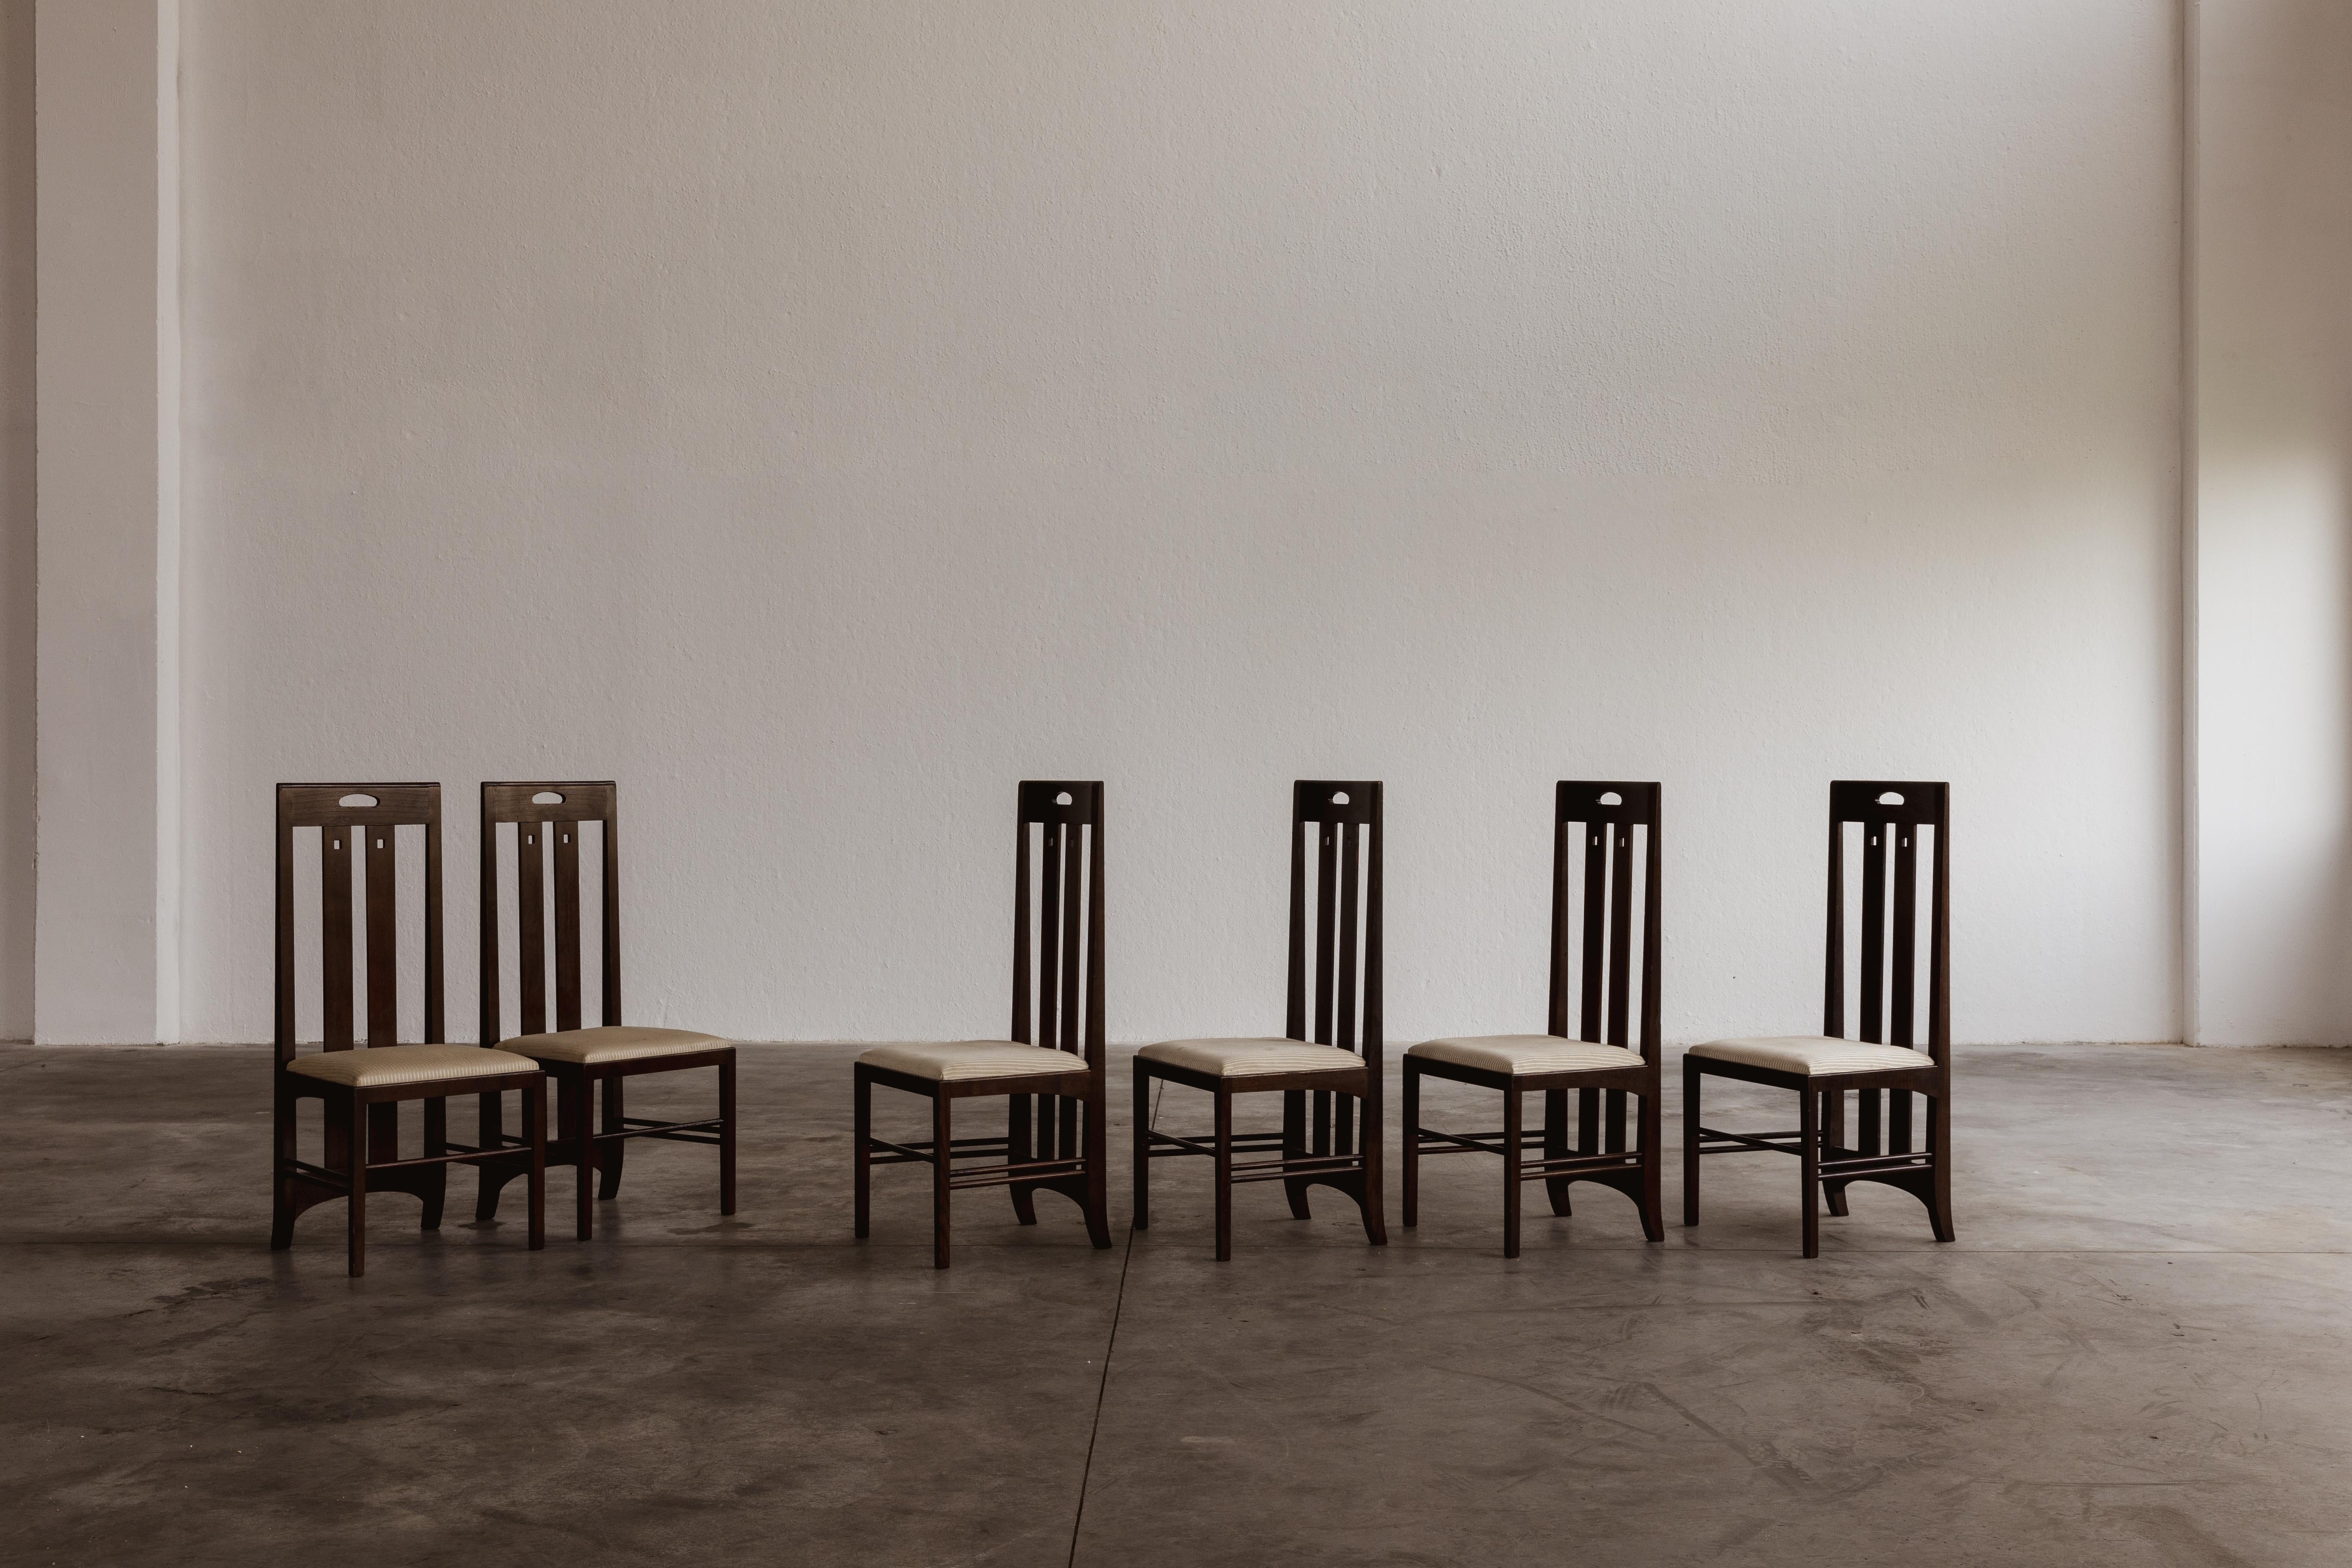 Charles Rennie Mackintosh “Ingram” dining chairs for Cassina, ash and fabric, United Kingdom, 1981, set of six.

The 